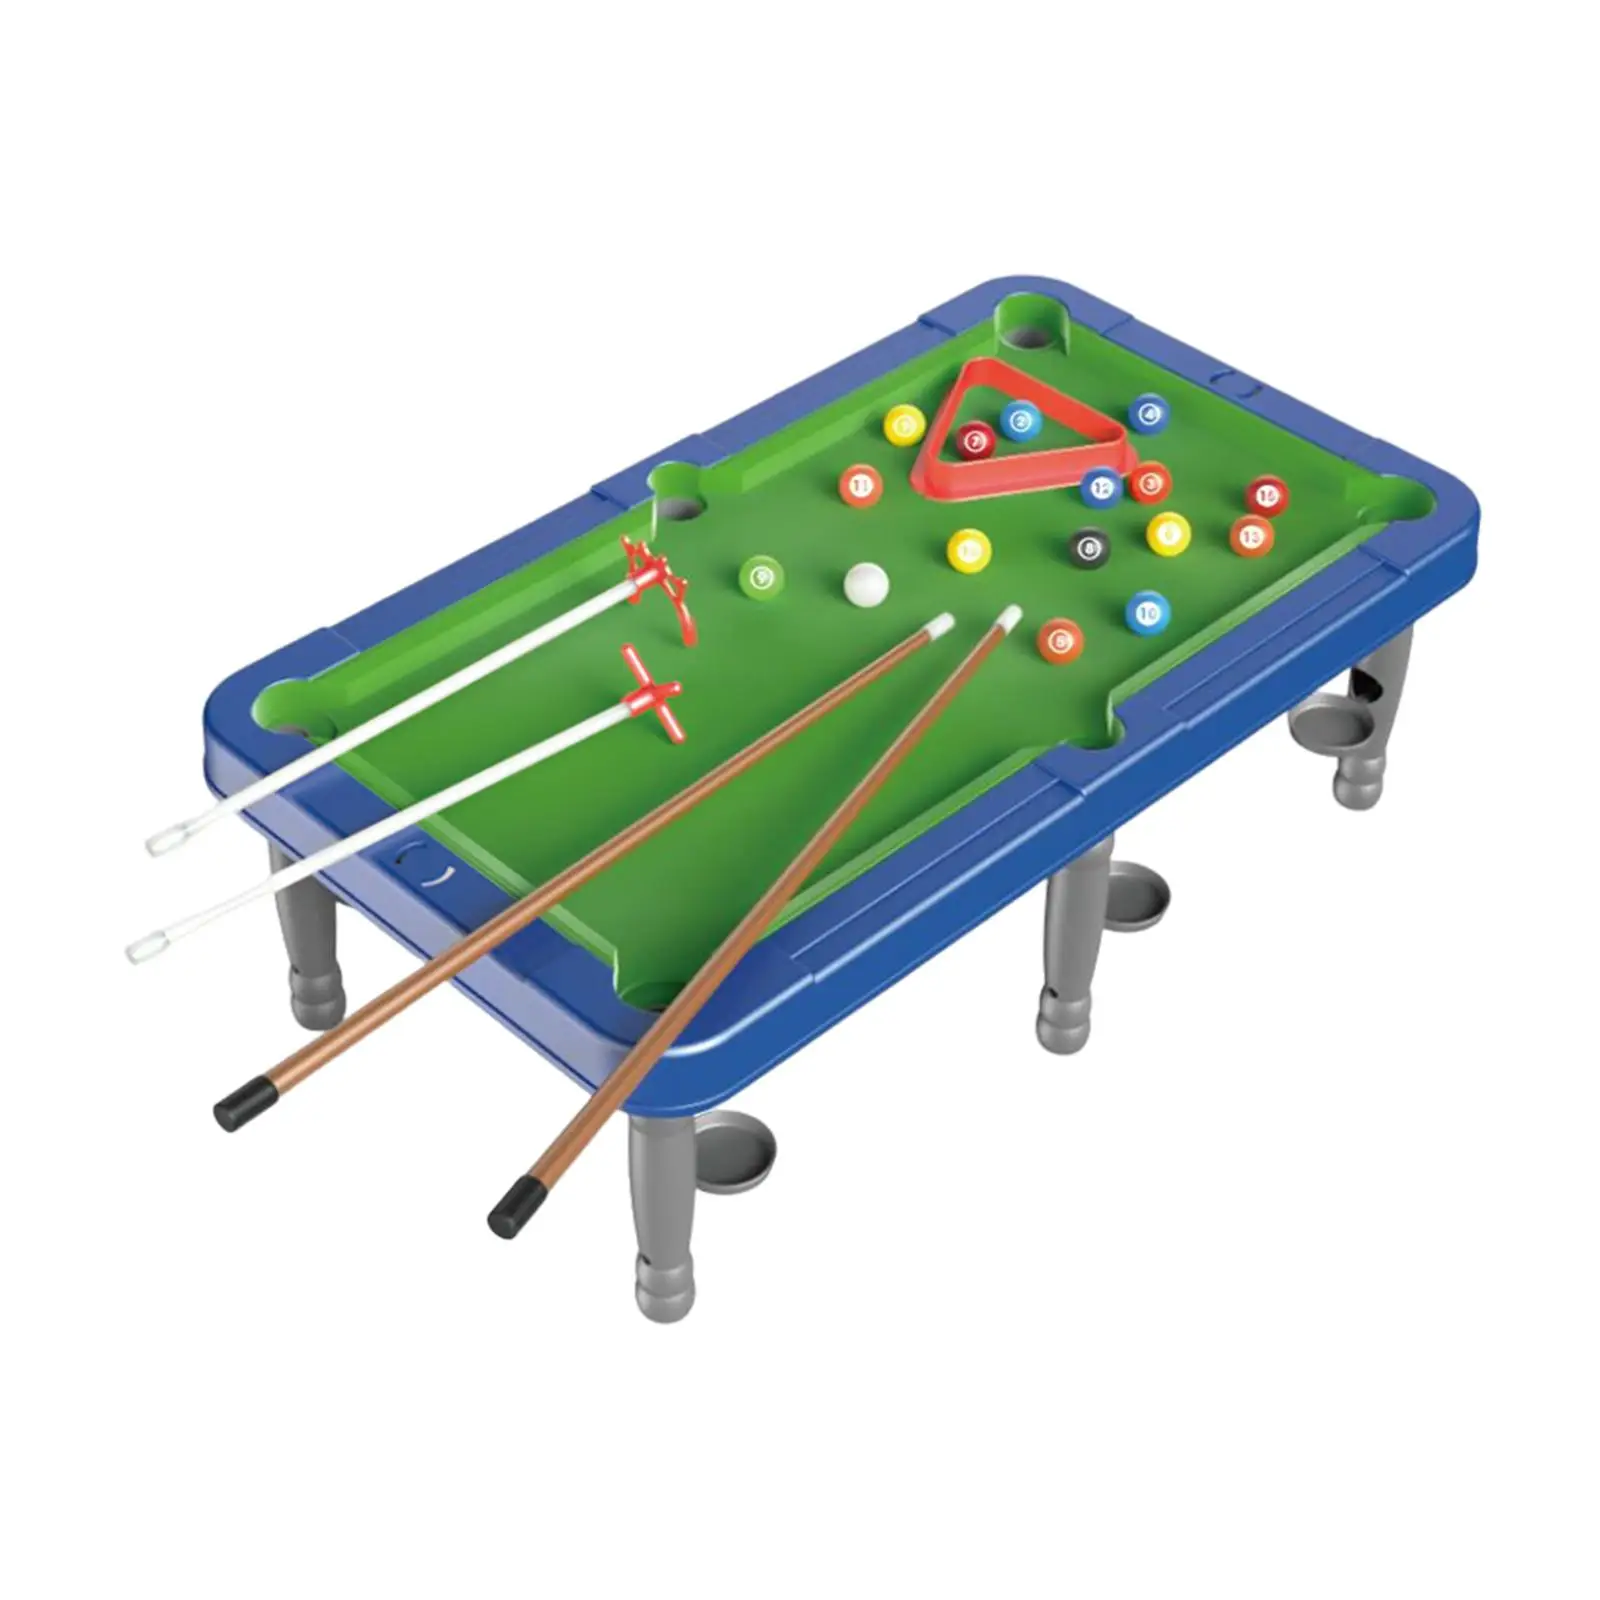 Portable Tabletop Billiards Game Office Use Leisure Chalk, Racking Triangle Game Toy Tabletop Billiards for Children Family Kids